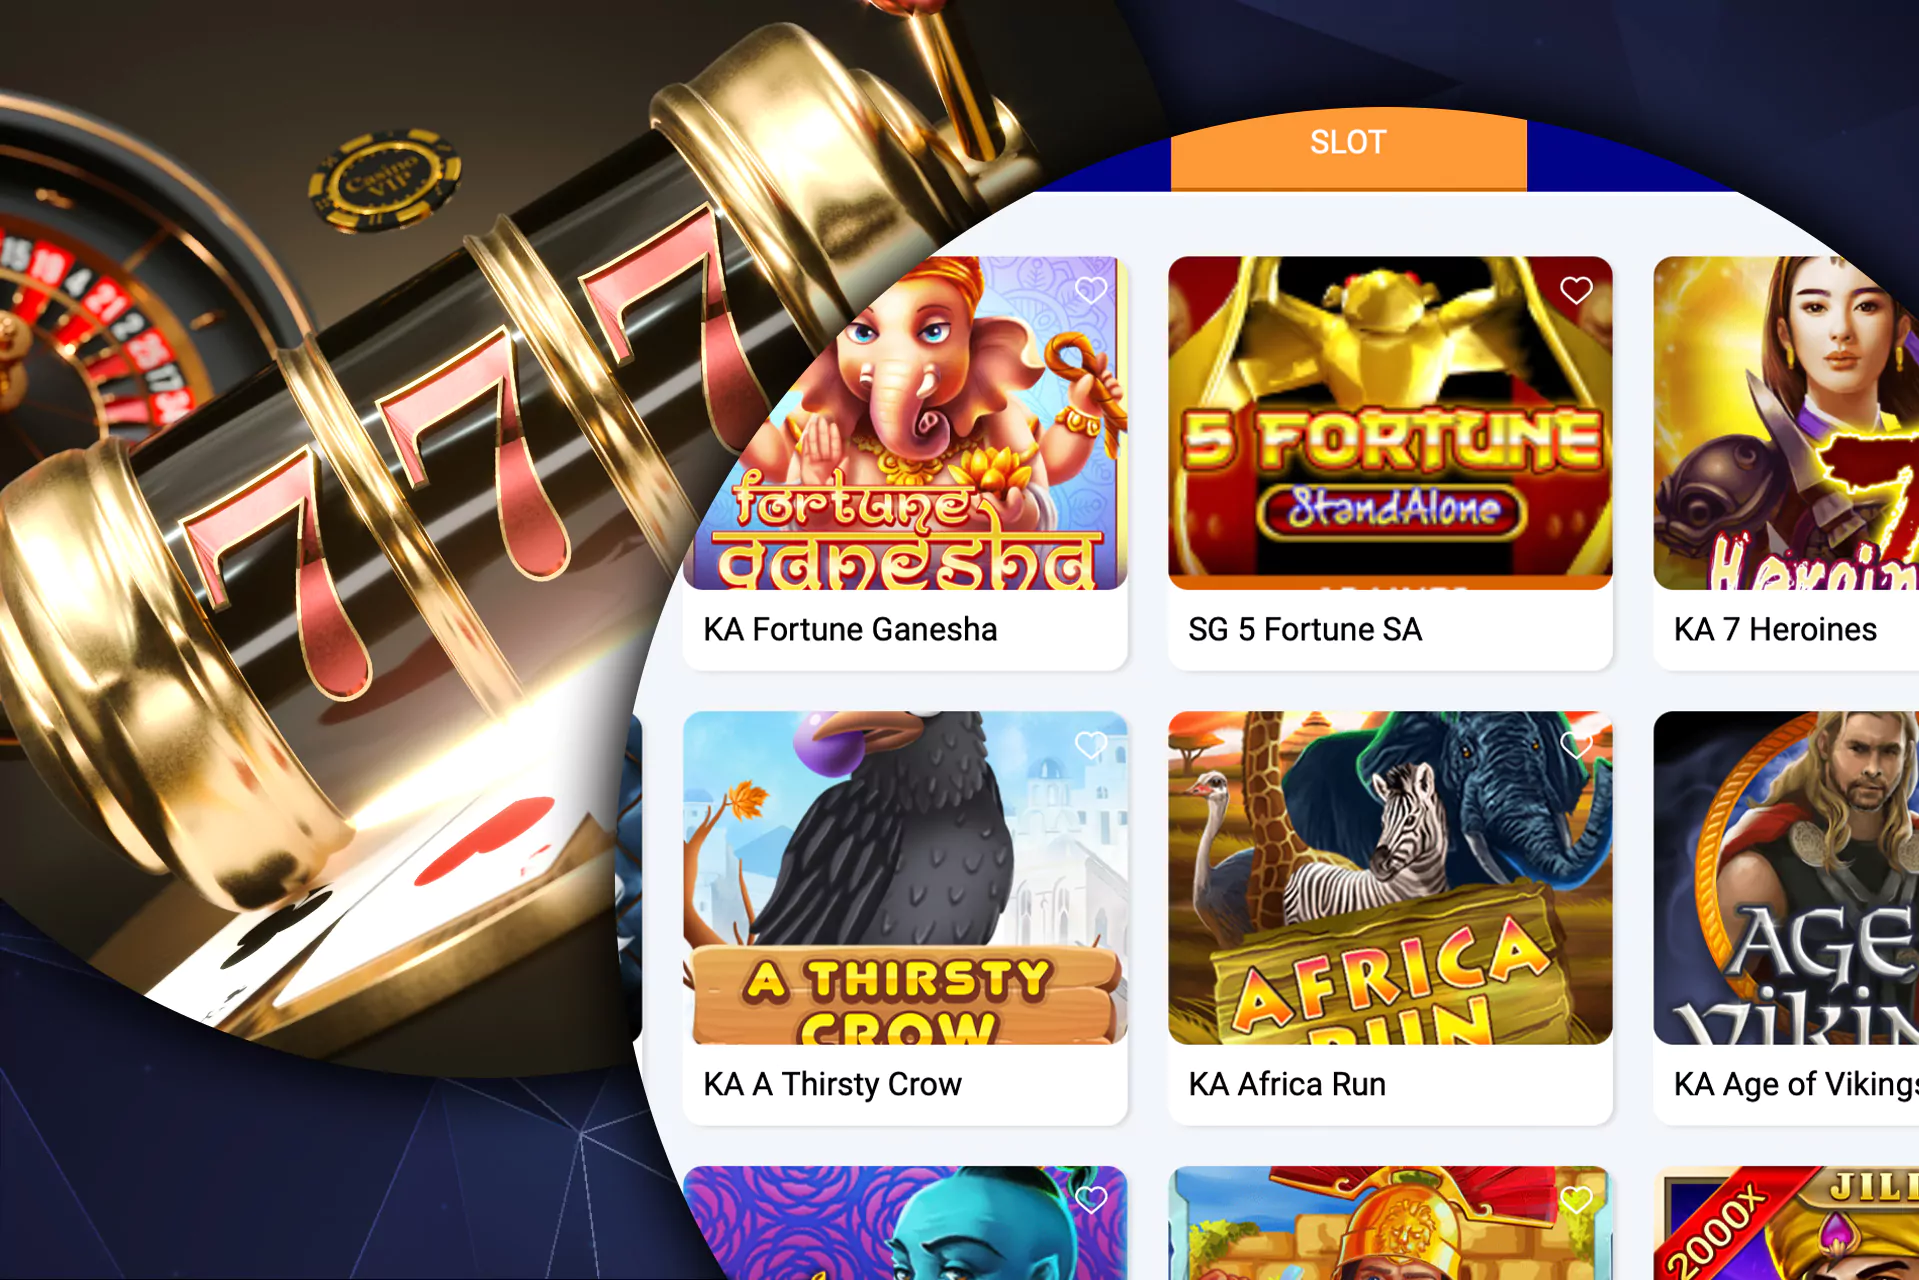 There are a lot of different slots with various topics in the ICCWIN casino.